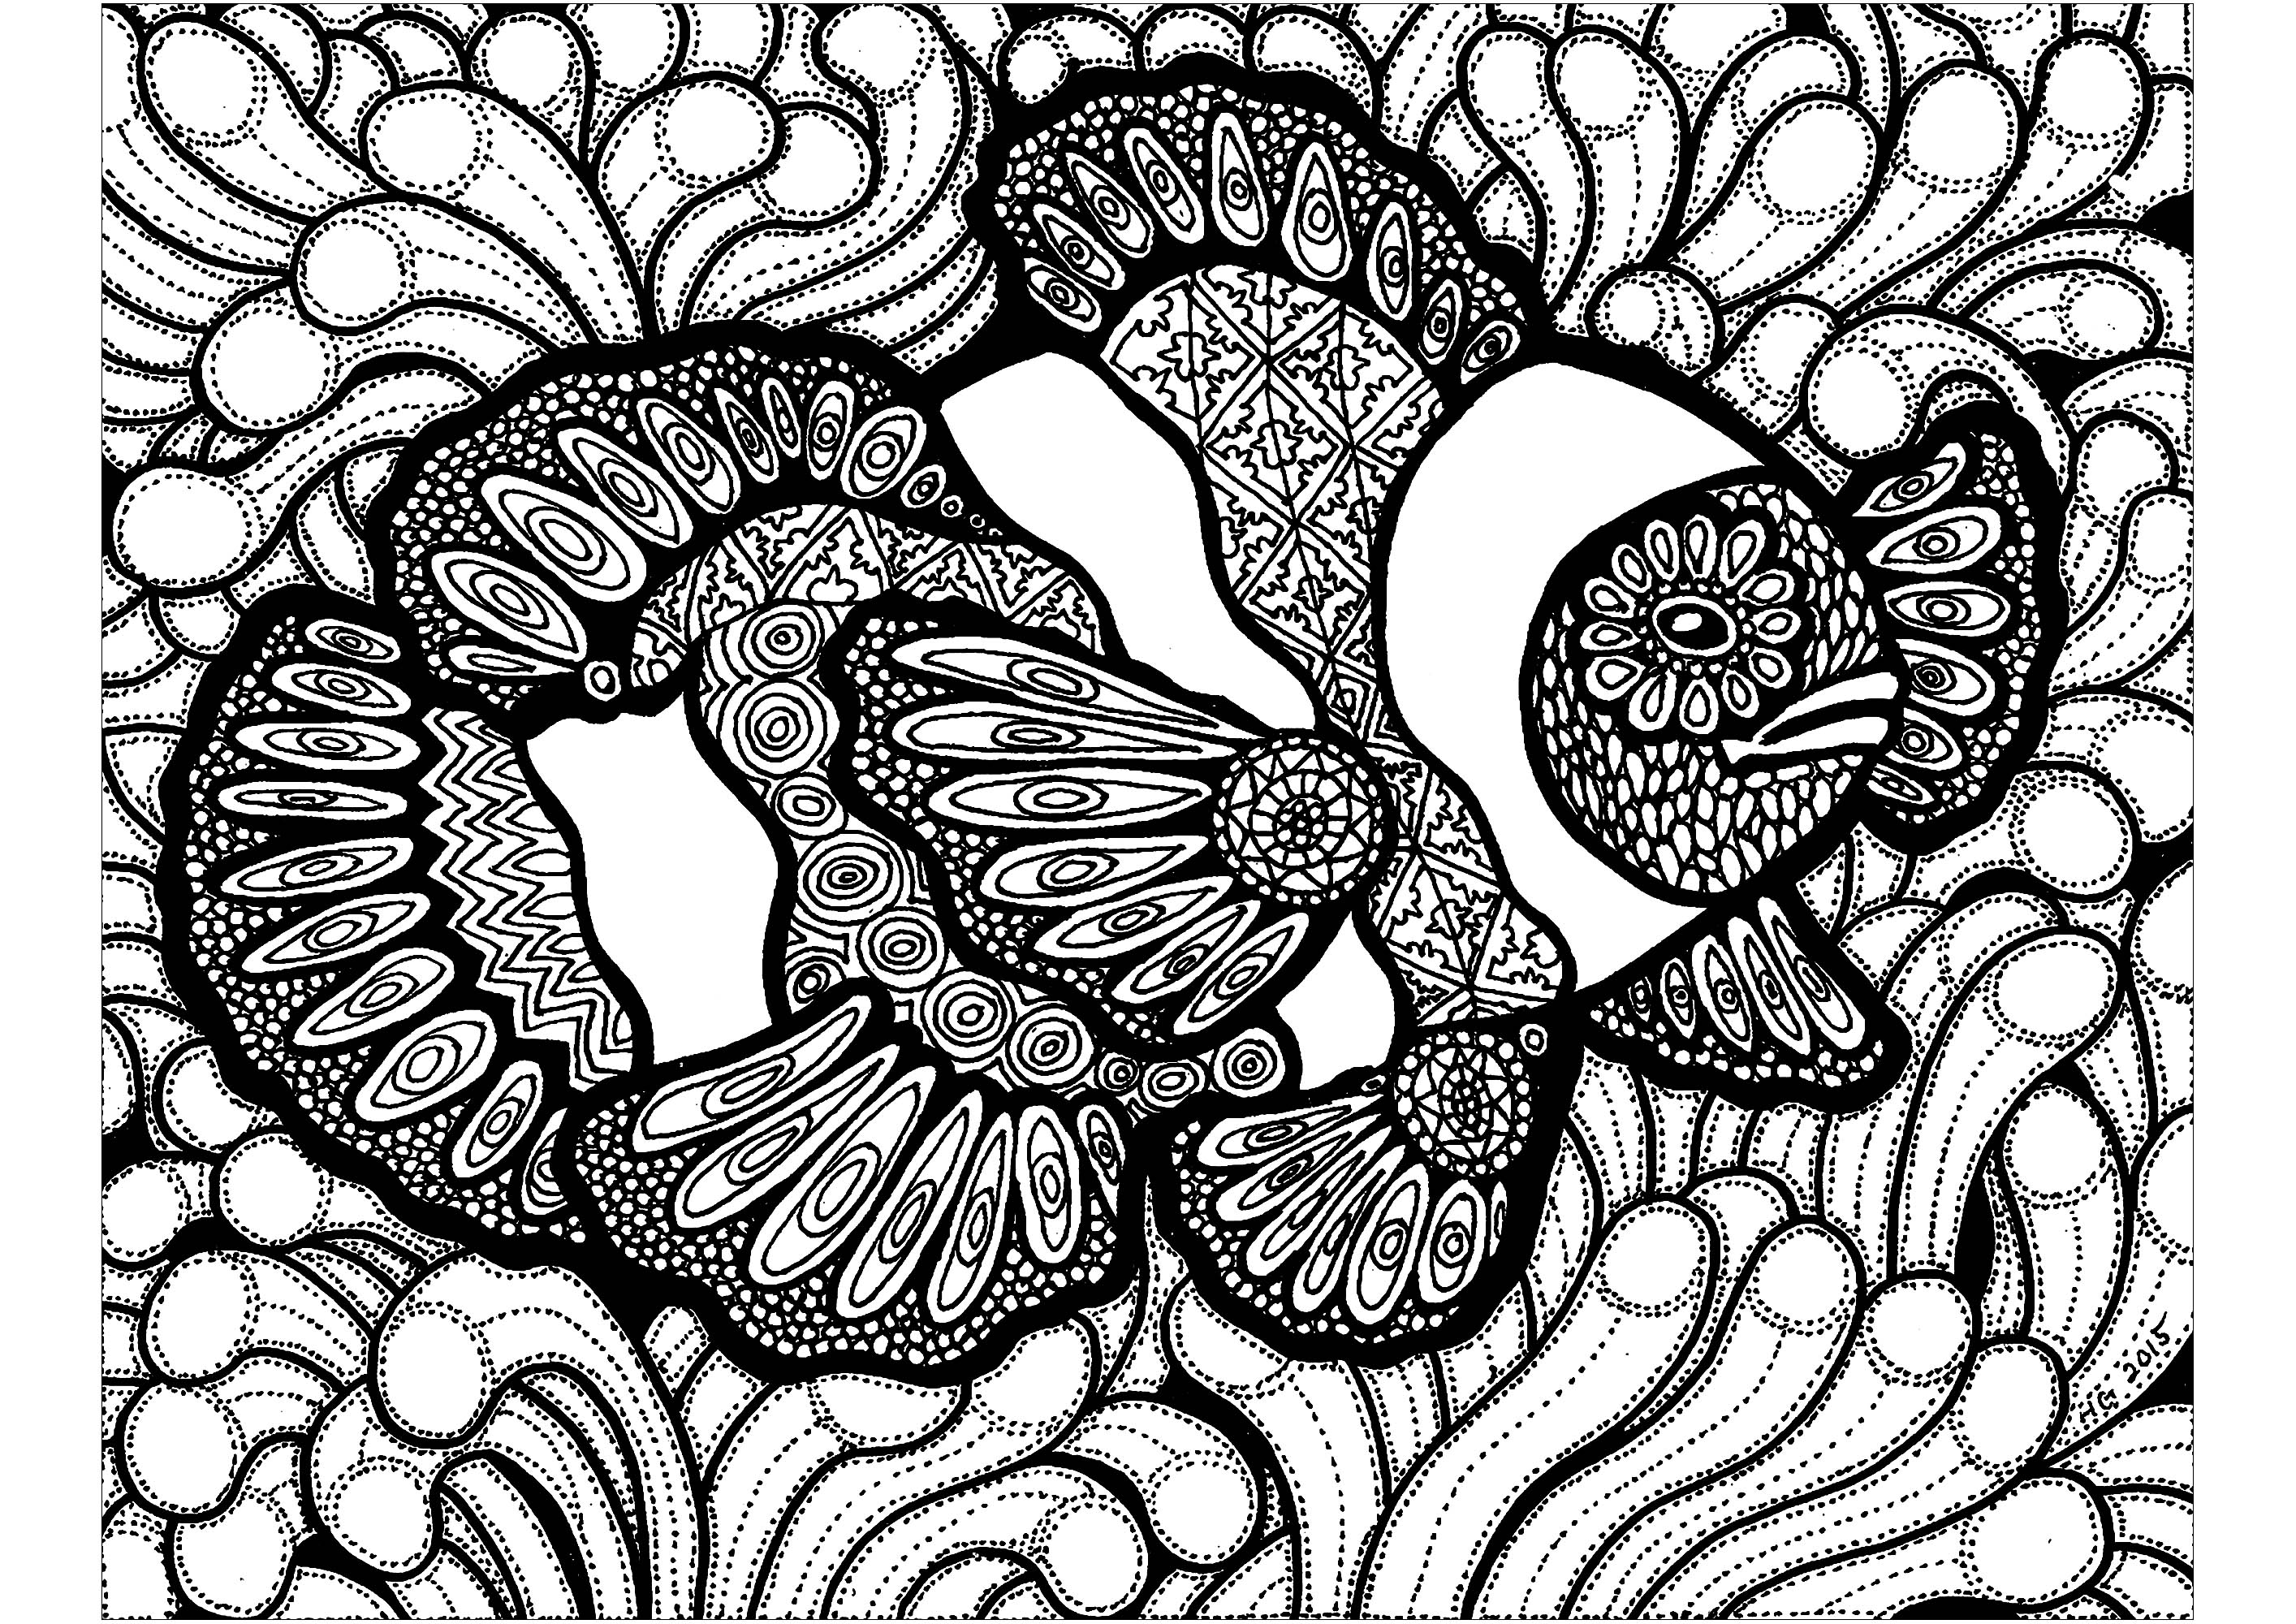 Get deep into the Zentangle water to swim in color!, Artist : HGCreative. Arts